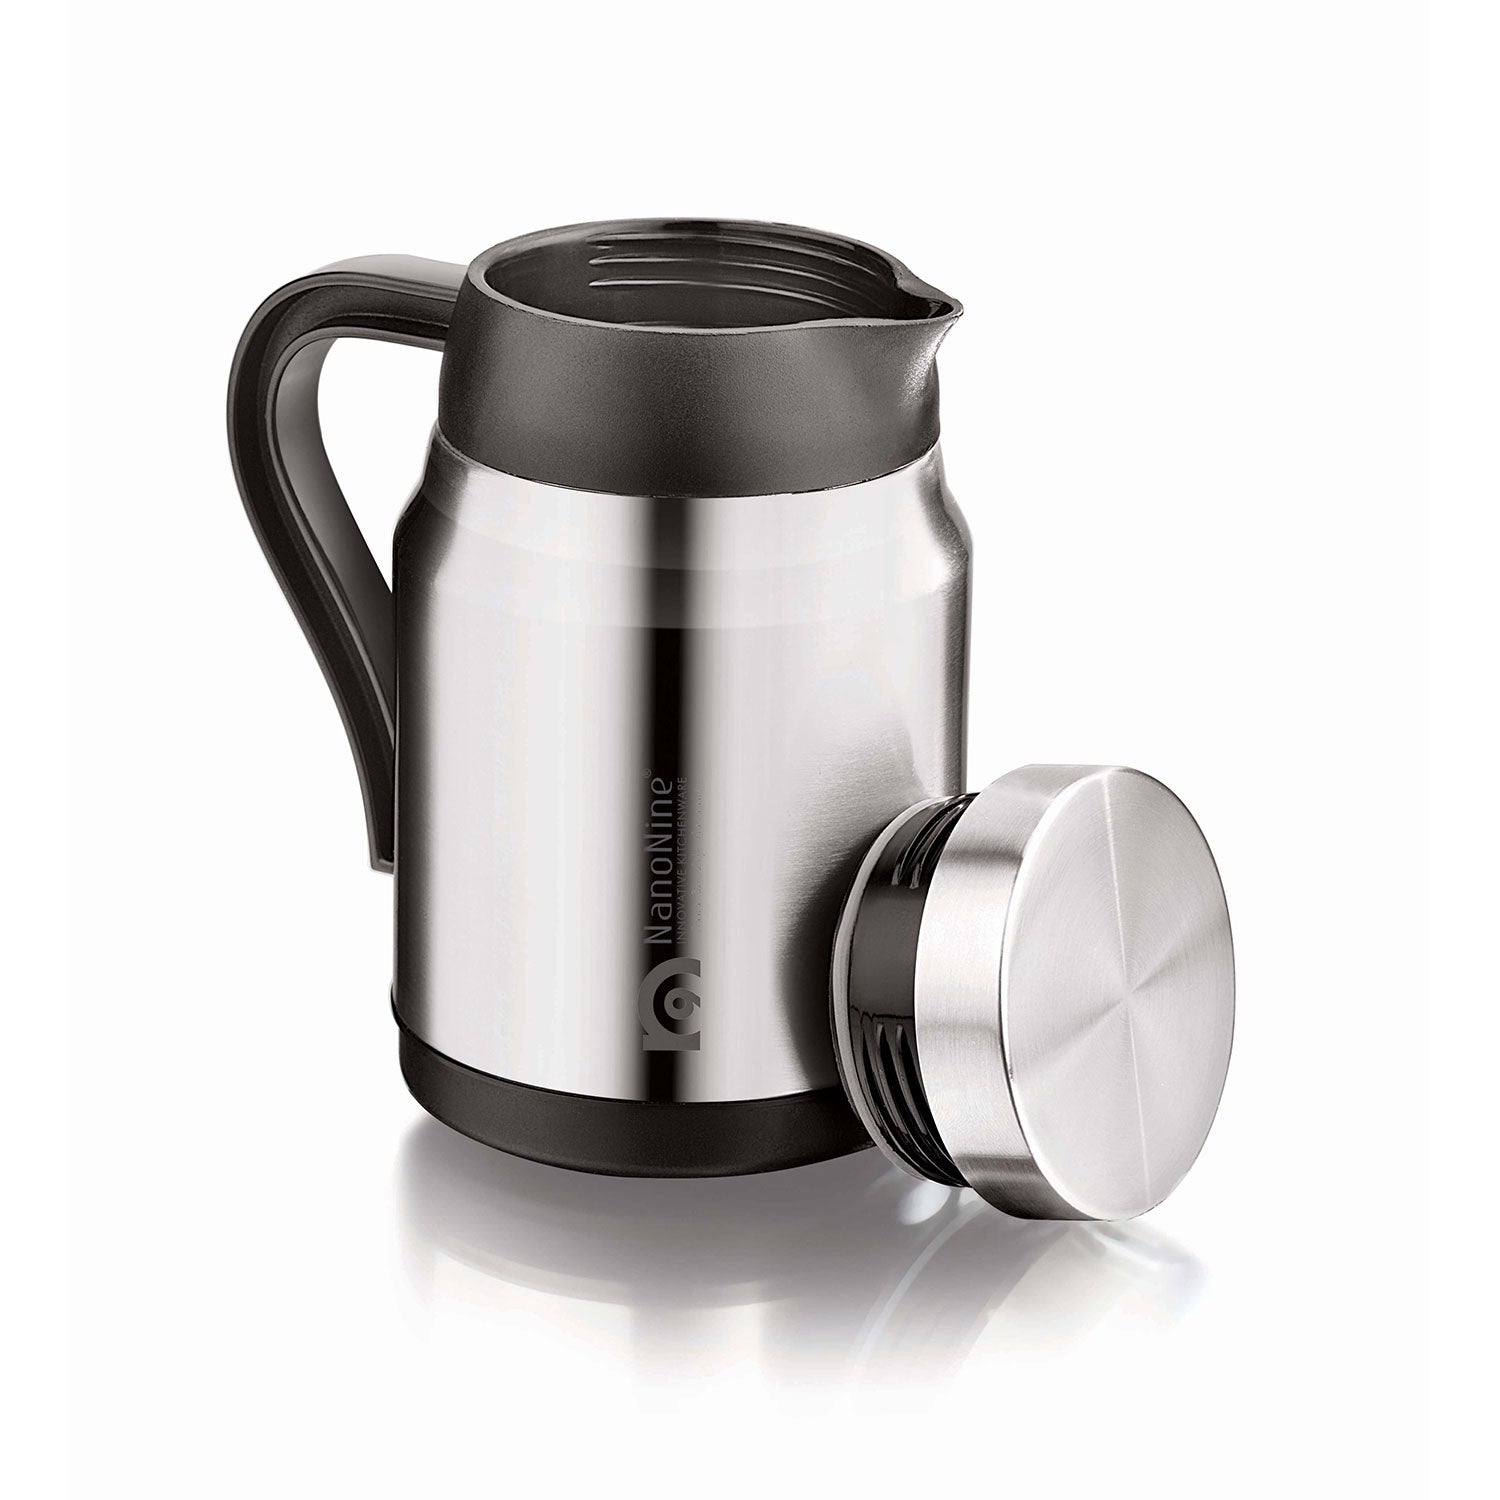 NanoNine T-Café 500 ml Double Wall Insulated Stainless Steel Flask.